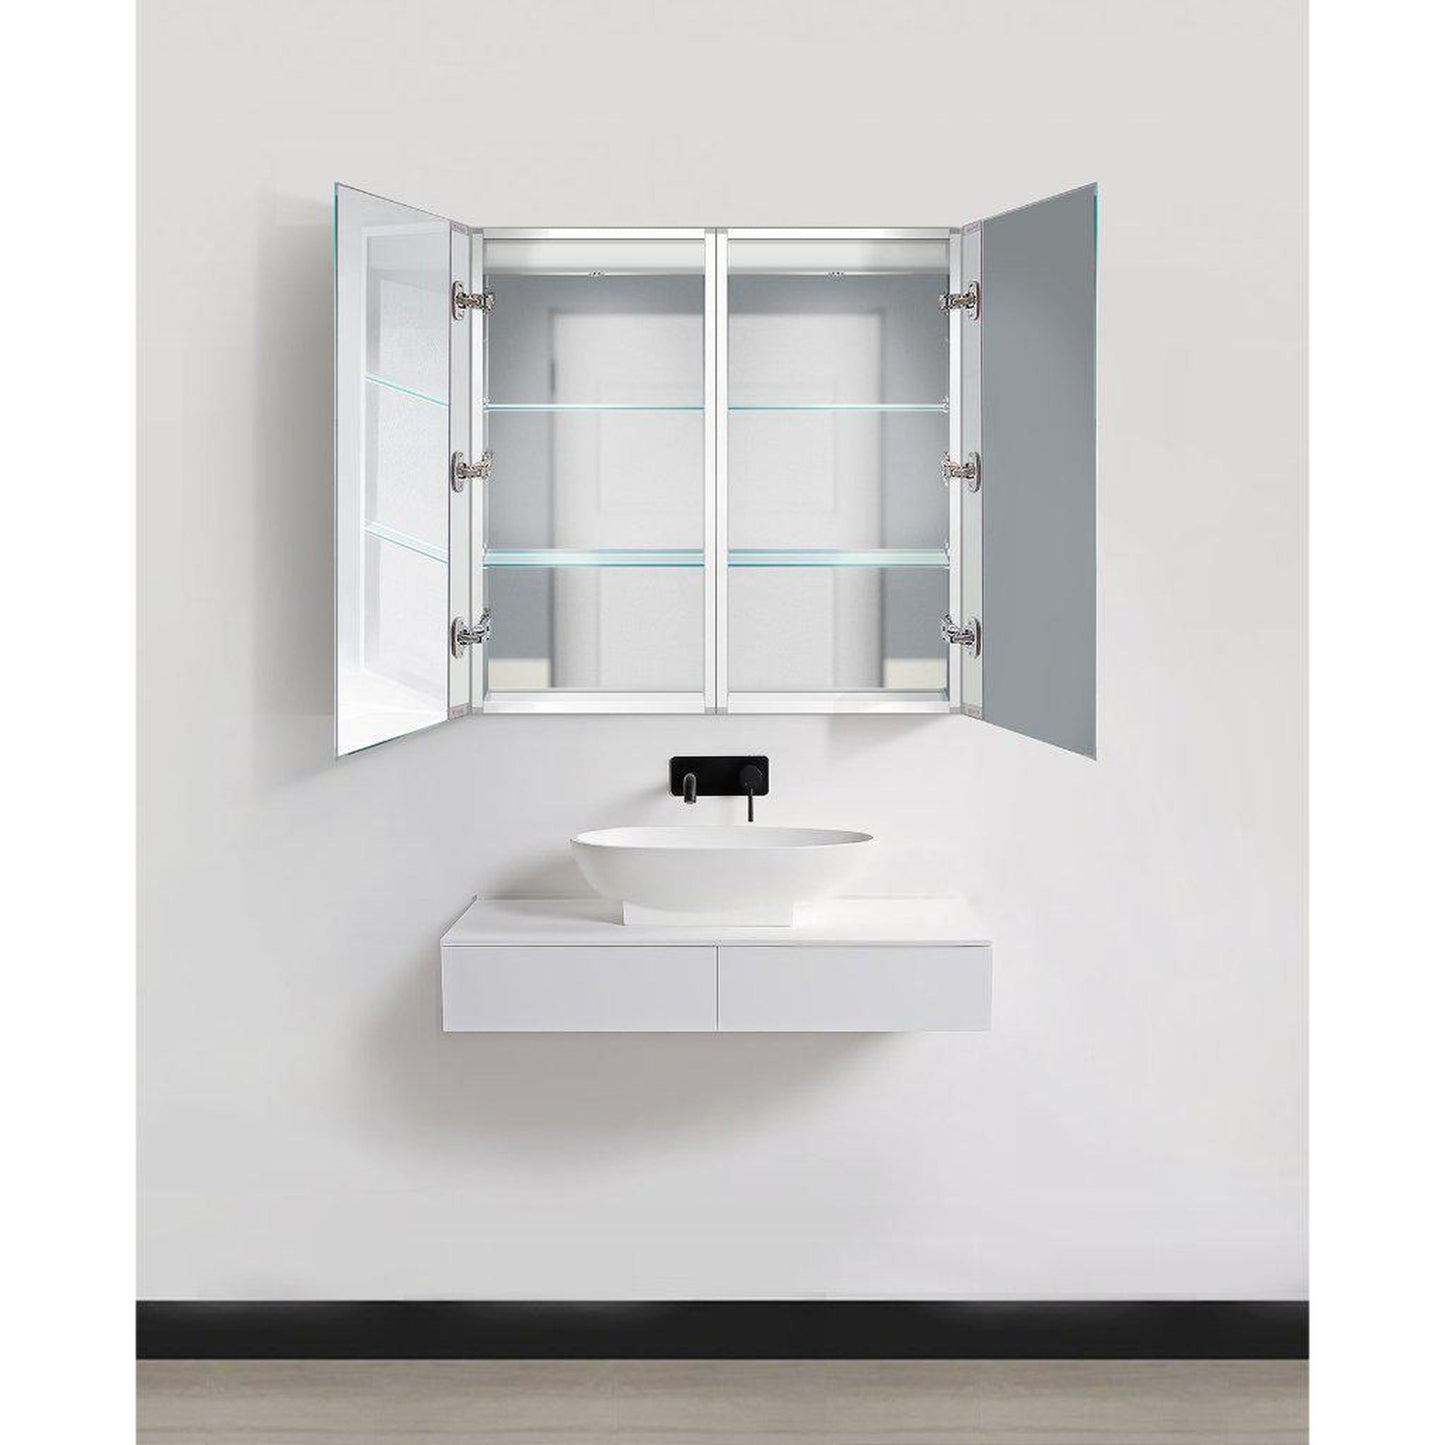 Krugg Reflections Kinetic 30" x 30" 6000K Double Dual Opening Rectangular Recessed/Surface-Mount Illuminated Silver Backed LED Medicine Cabinet Mirror With Built-in Defogger, Dimmer and Electrical Outlet